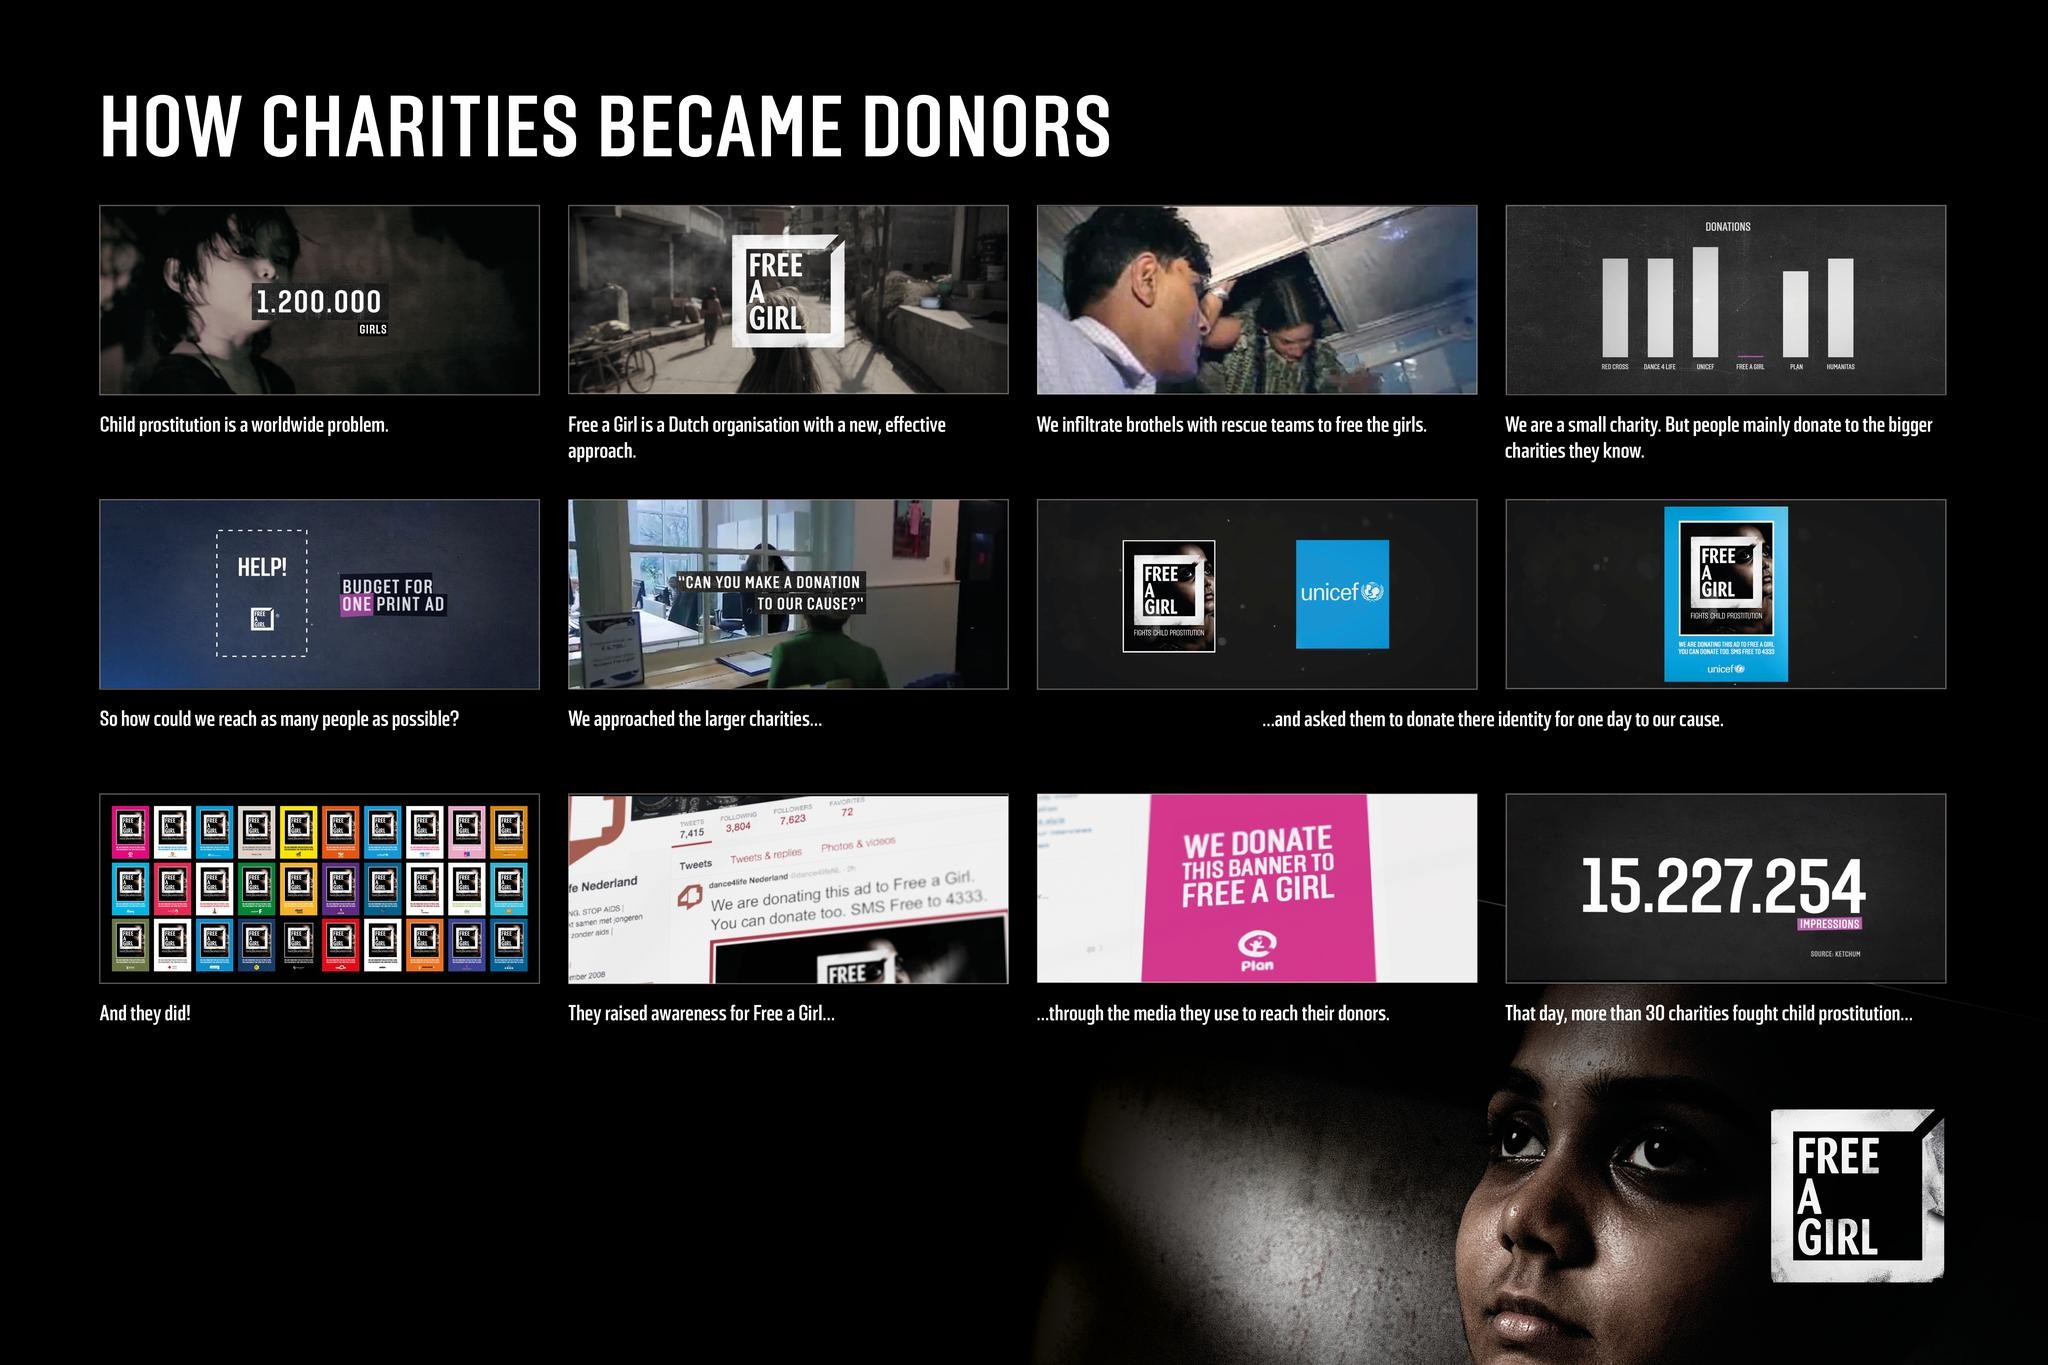 How charities became donors